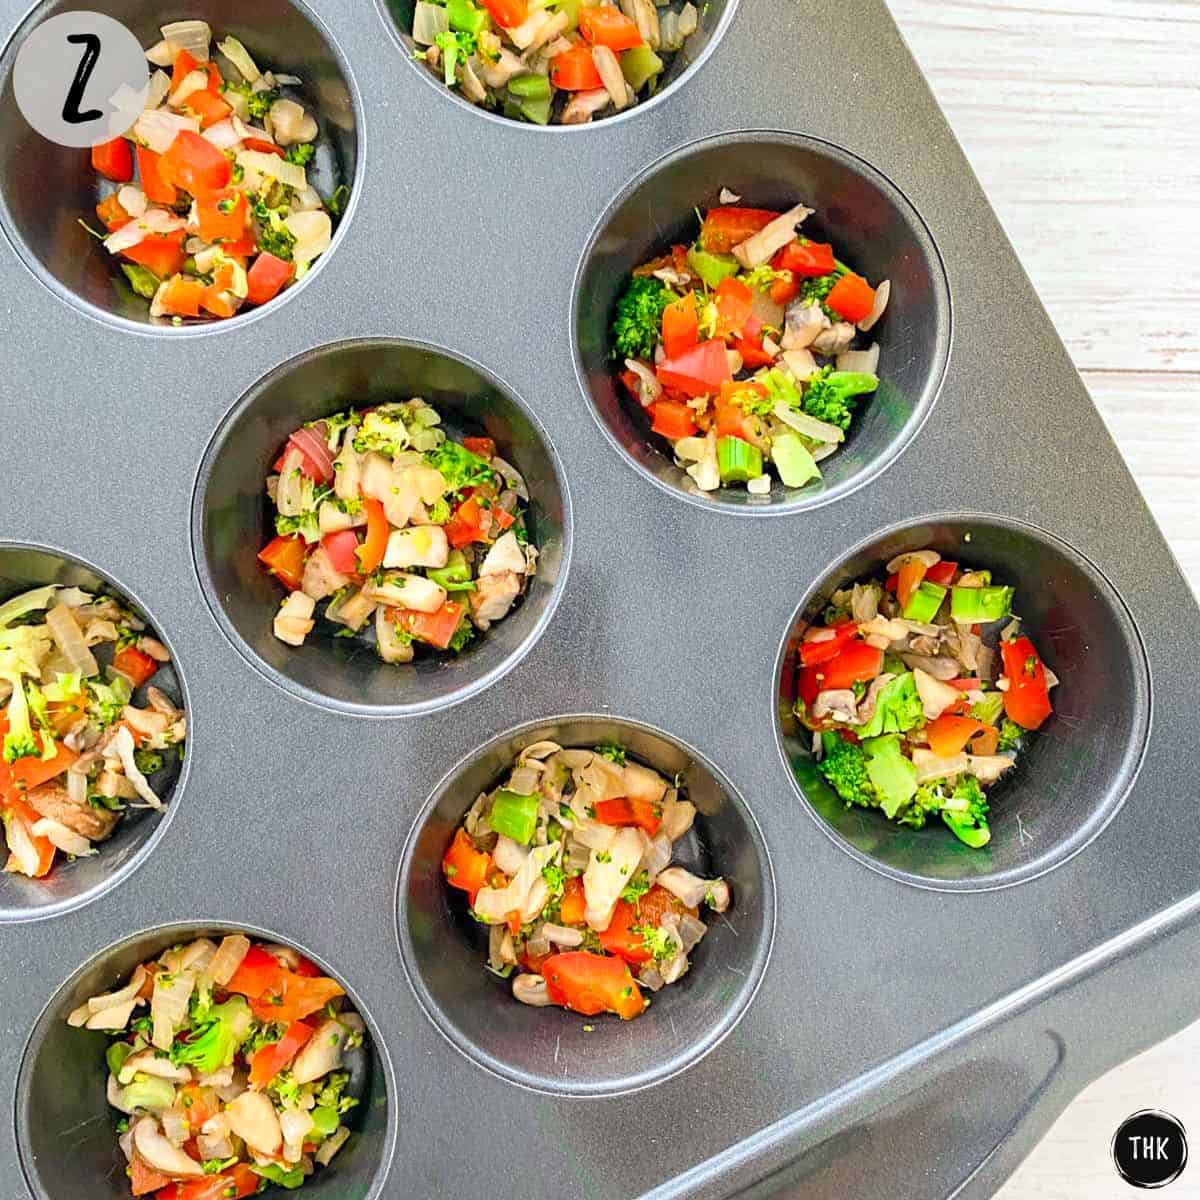 Muffin pan with finely chopped veggies inside.